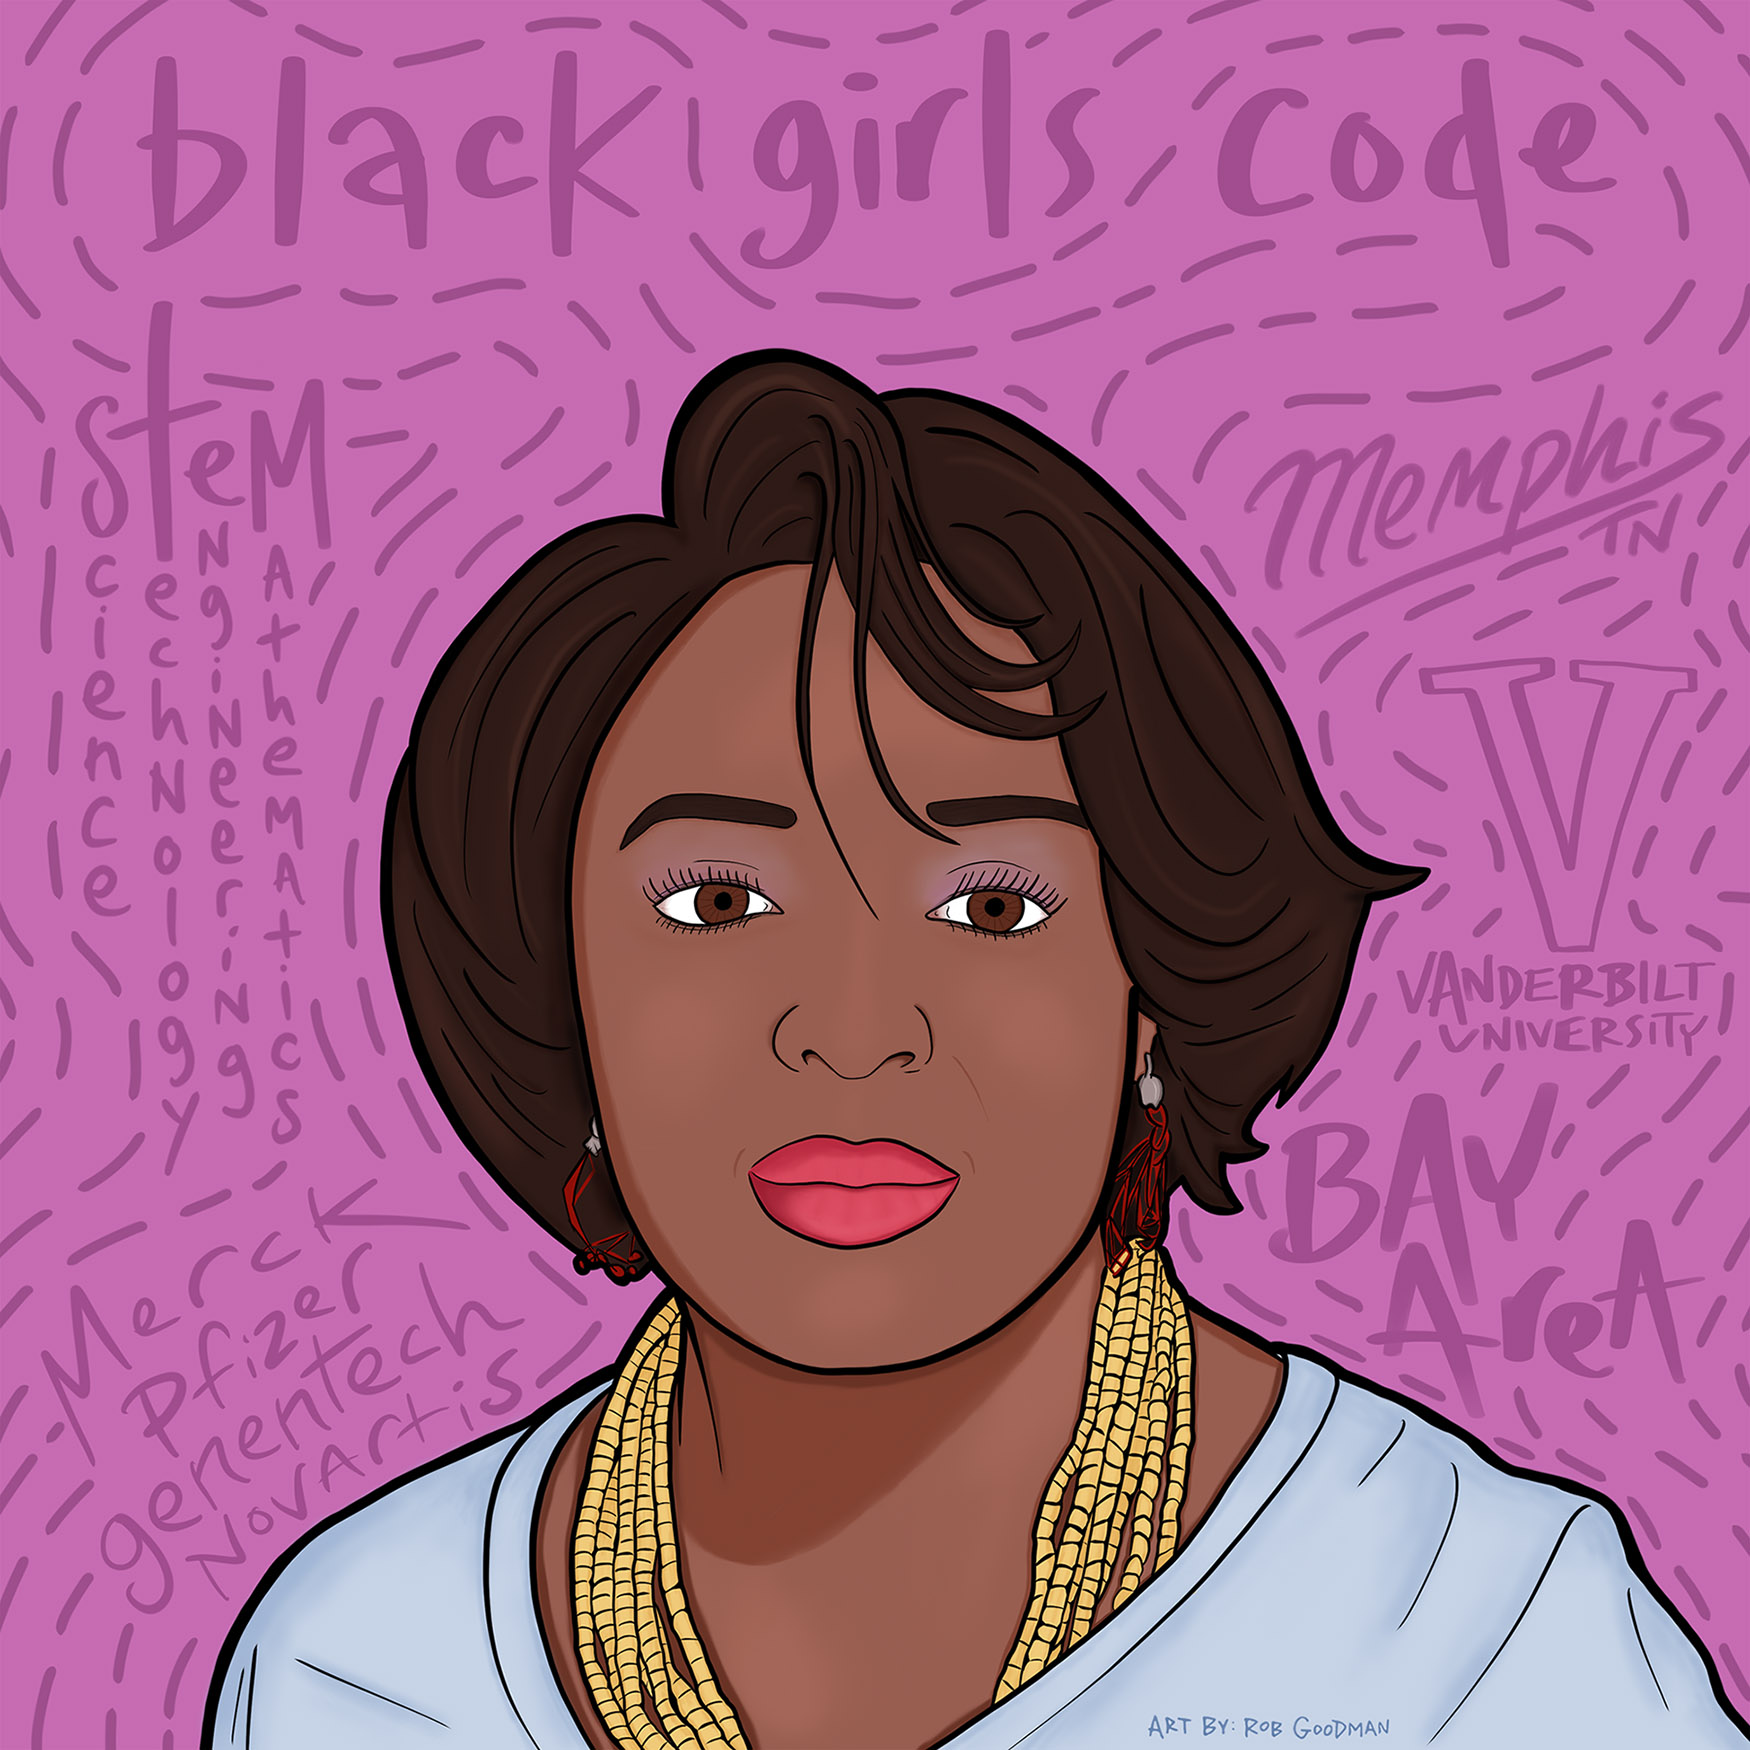 Kimberly Bryant, Founder and Executive Director of Black Girls Code